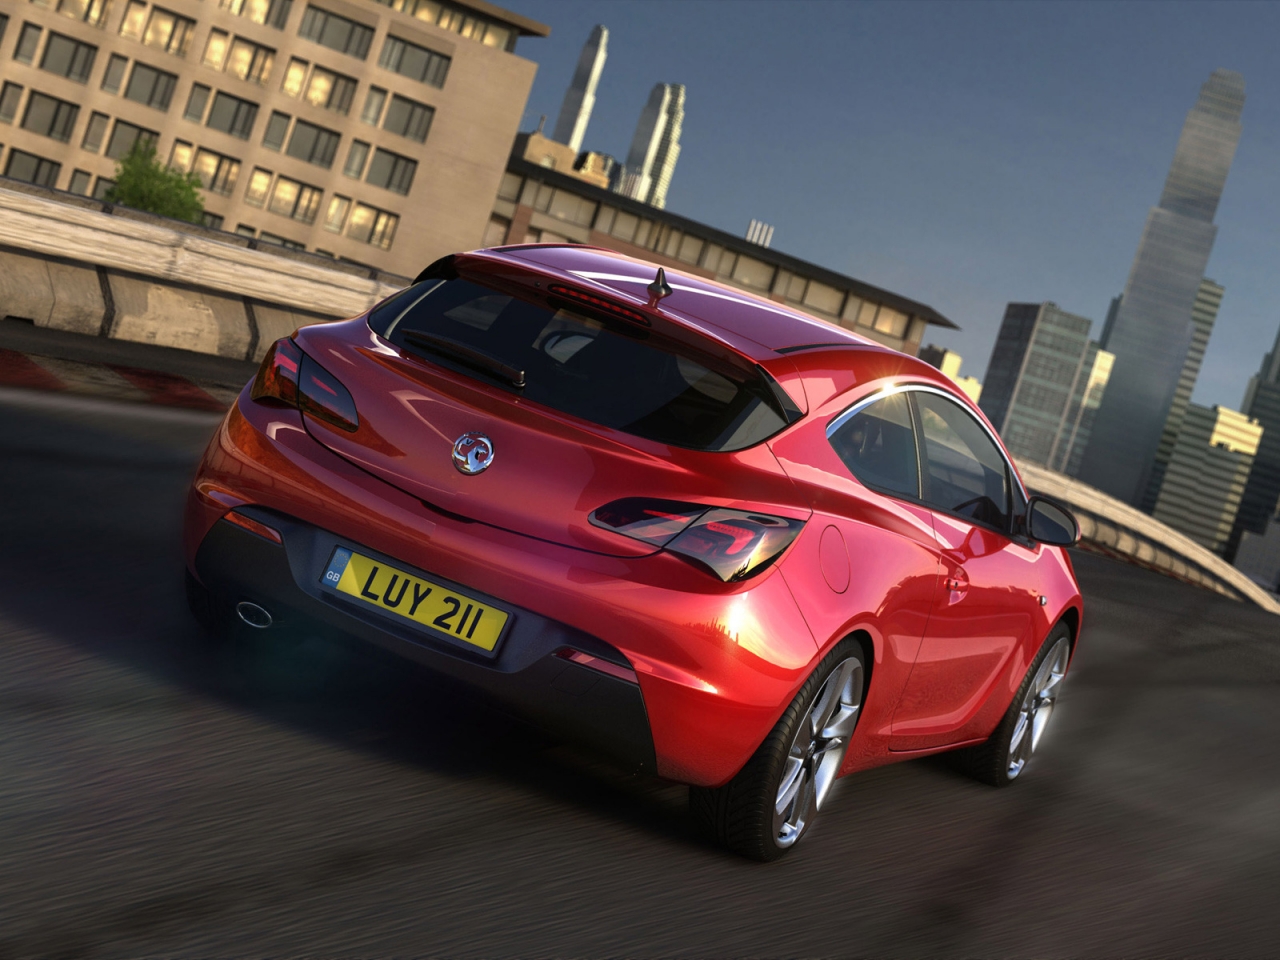 2012 Vauxhall Astra GTC Speed for 1280 x 960 resolution